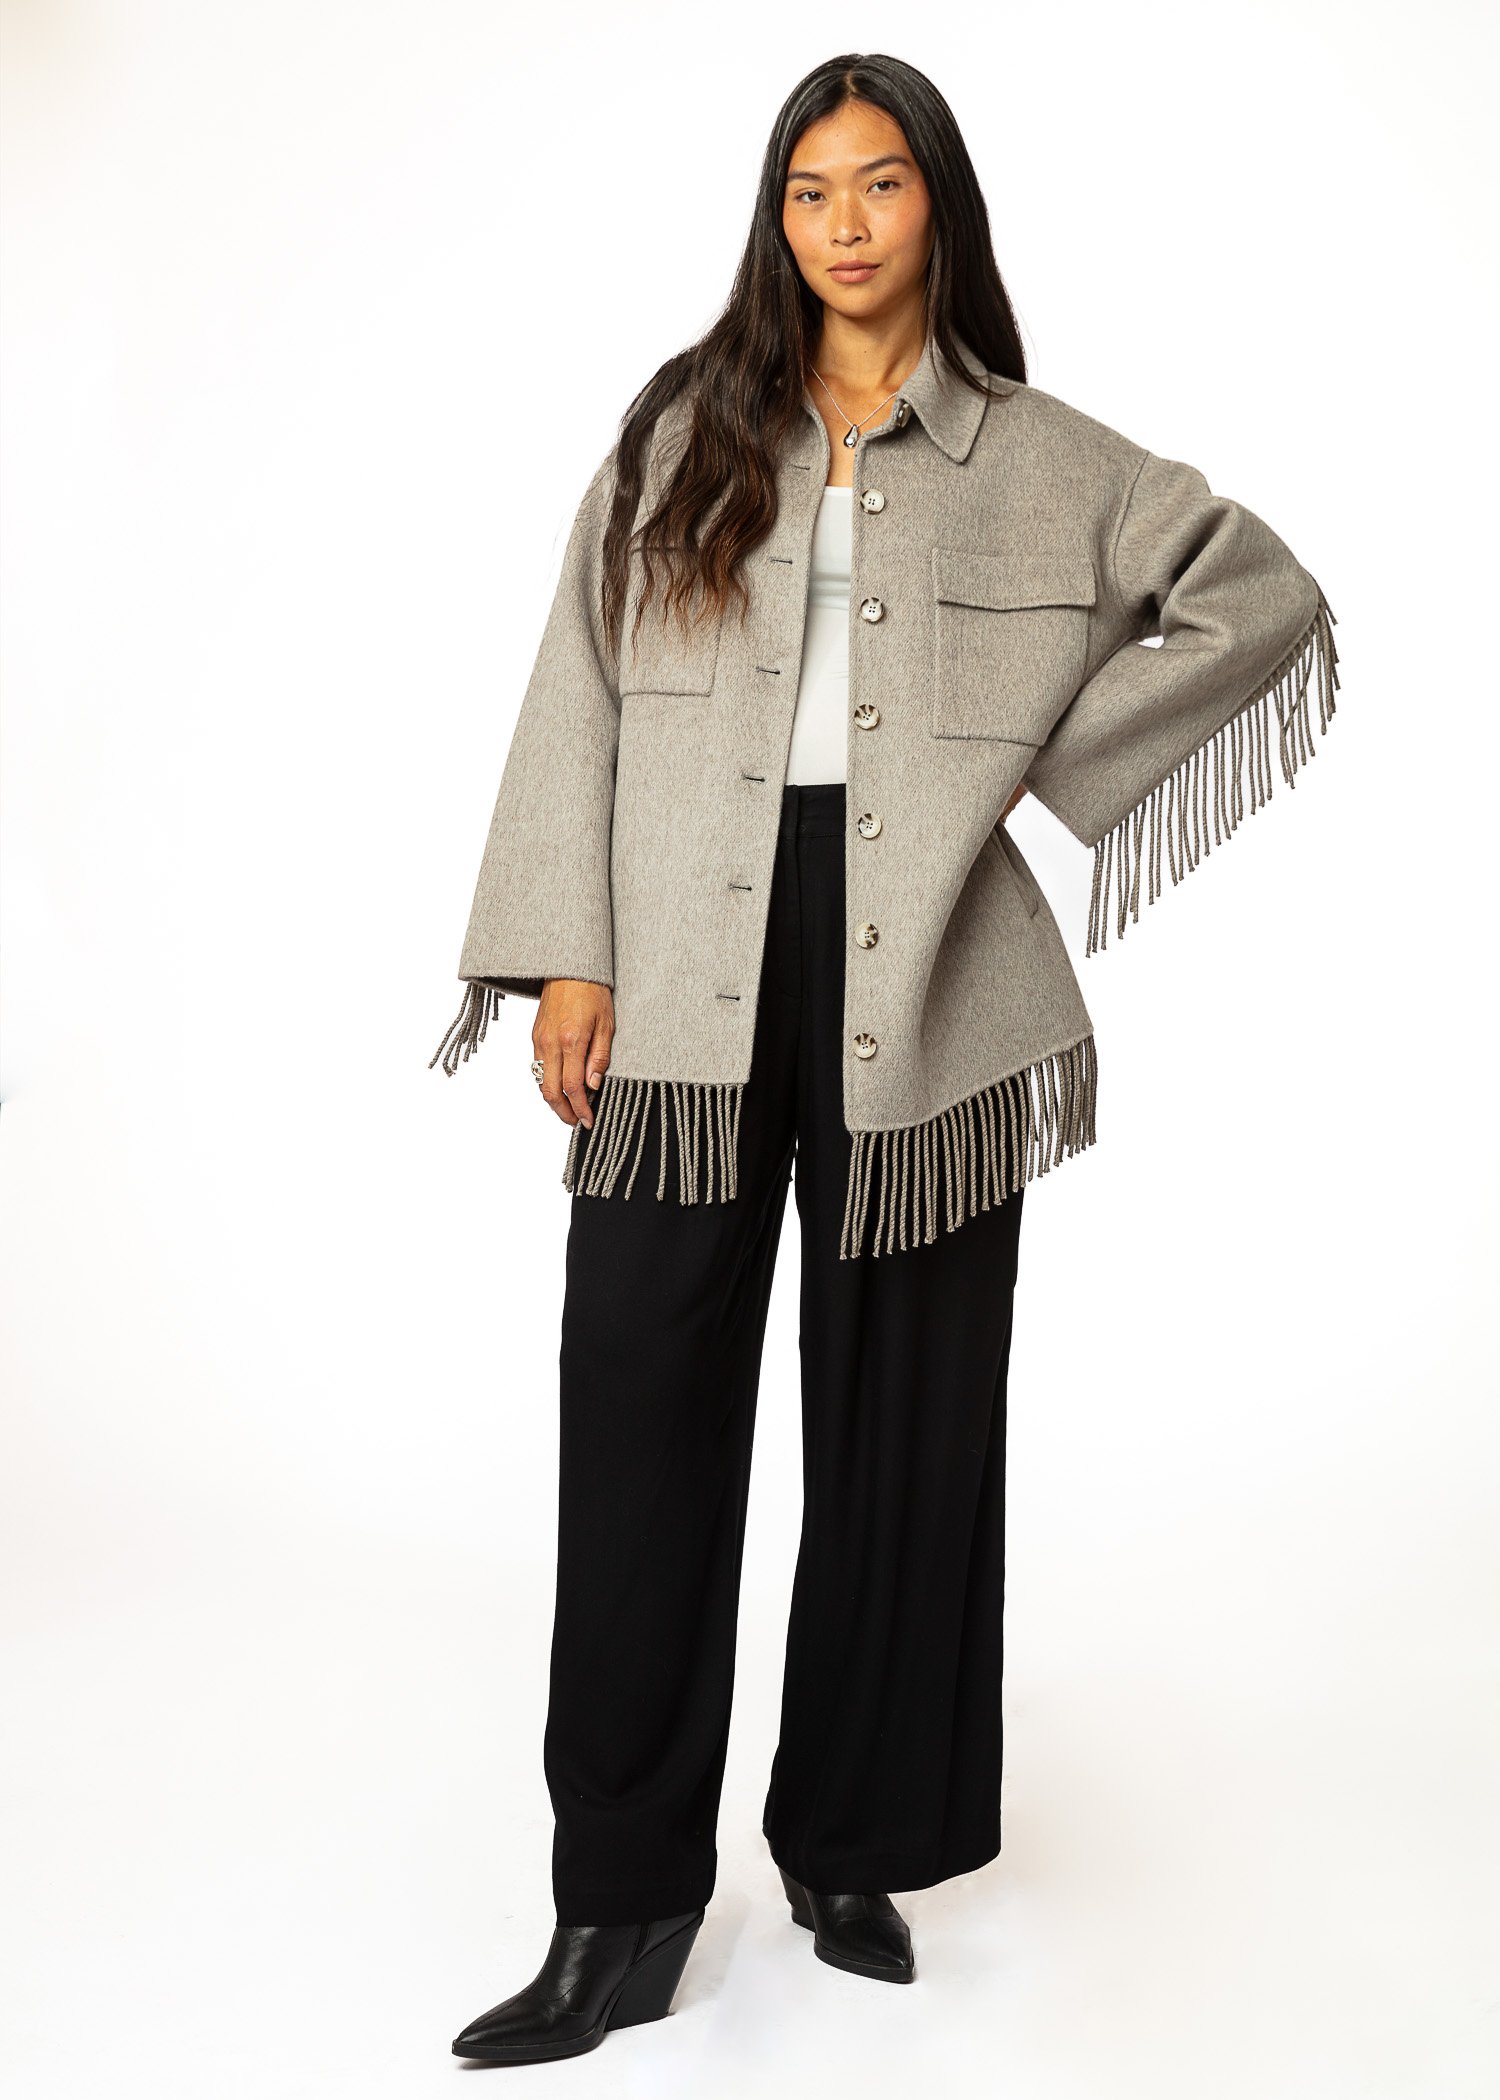 Grey wool coat with fringes